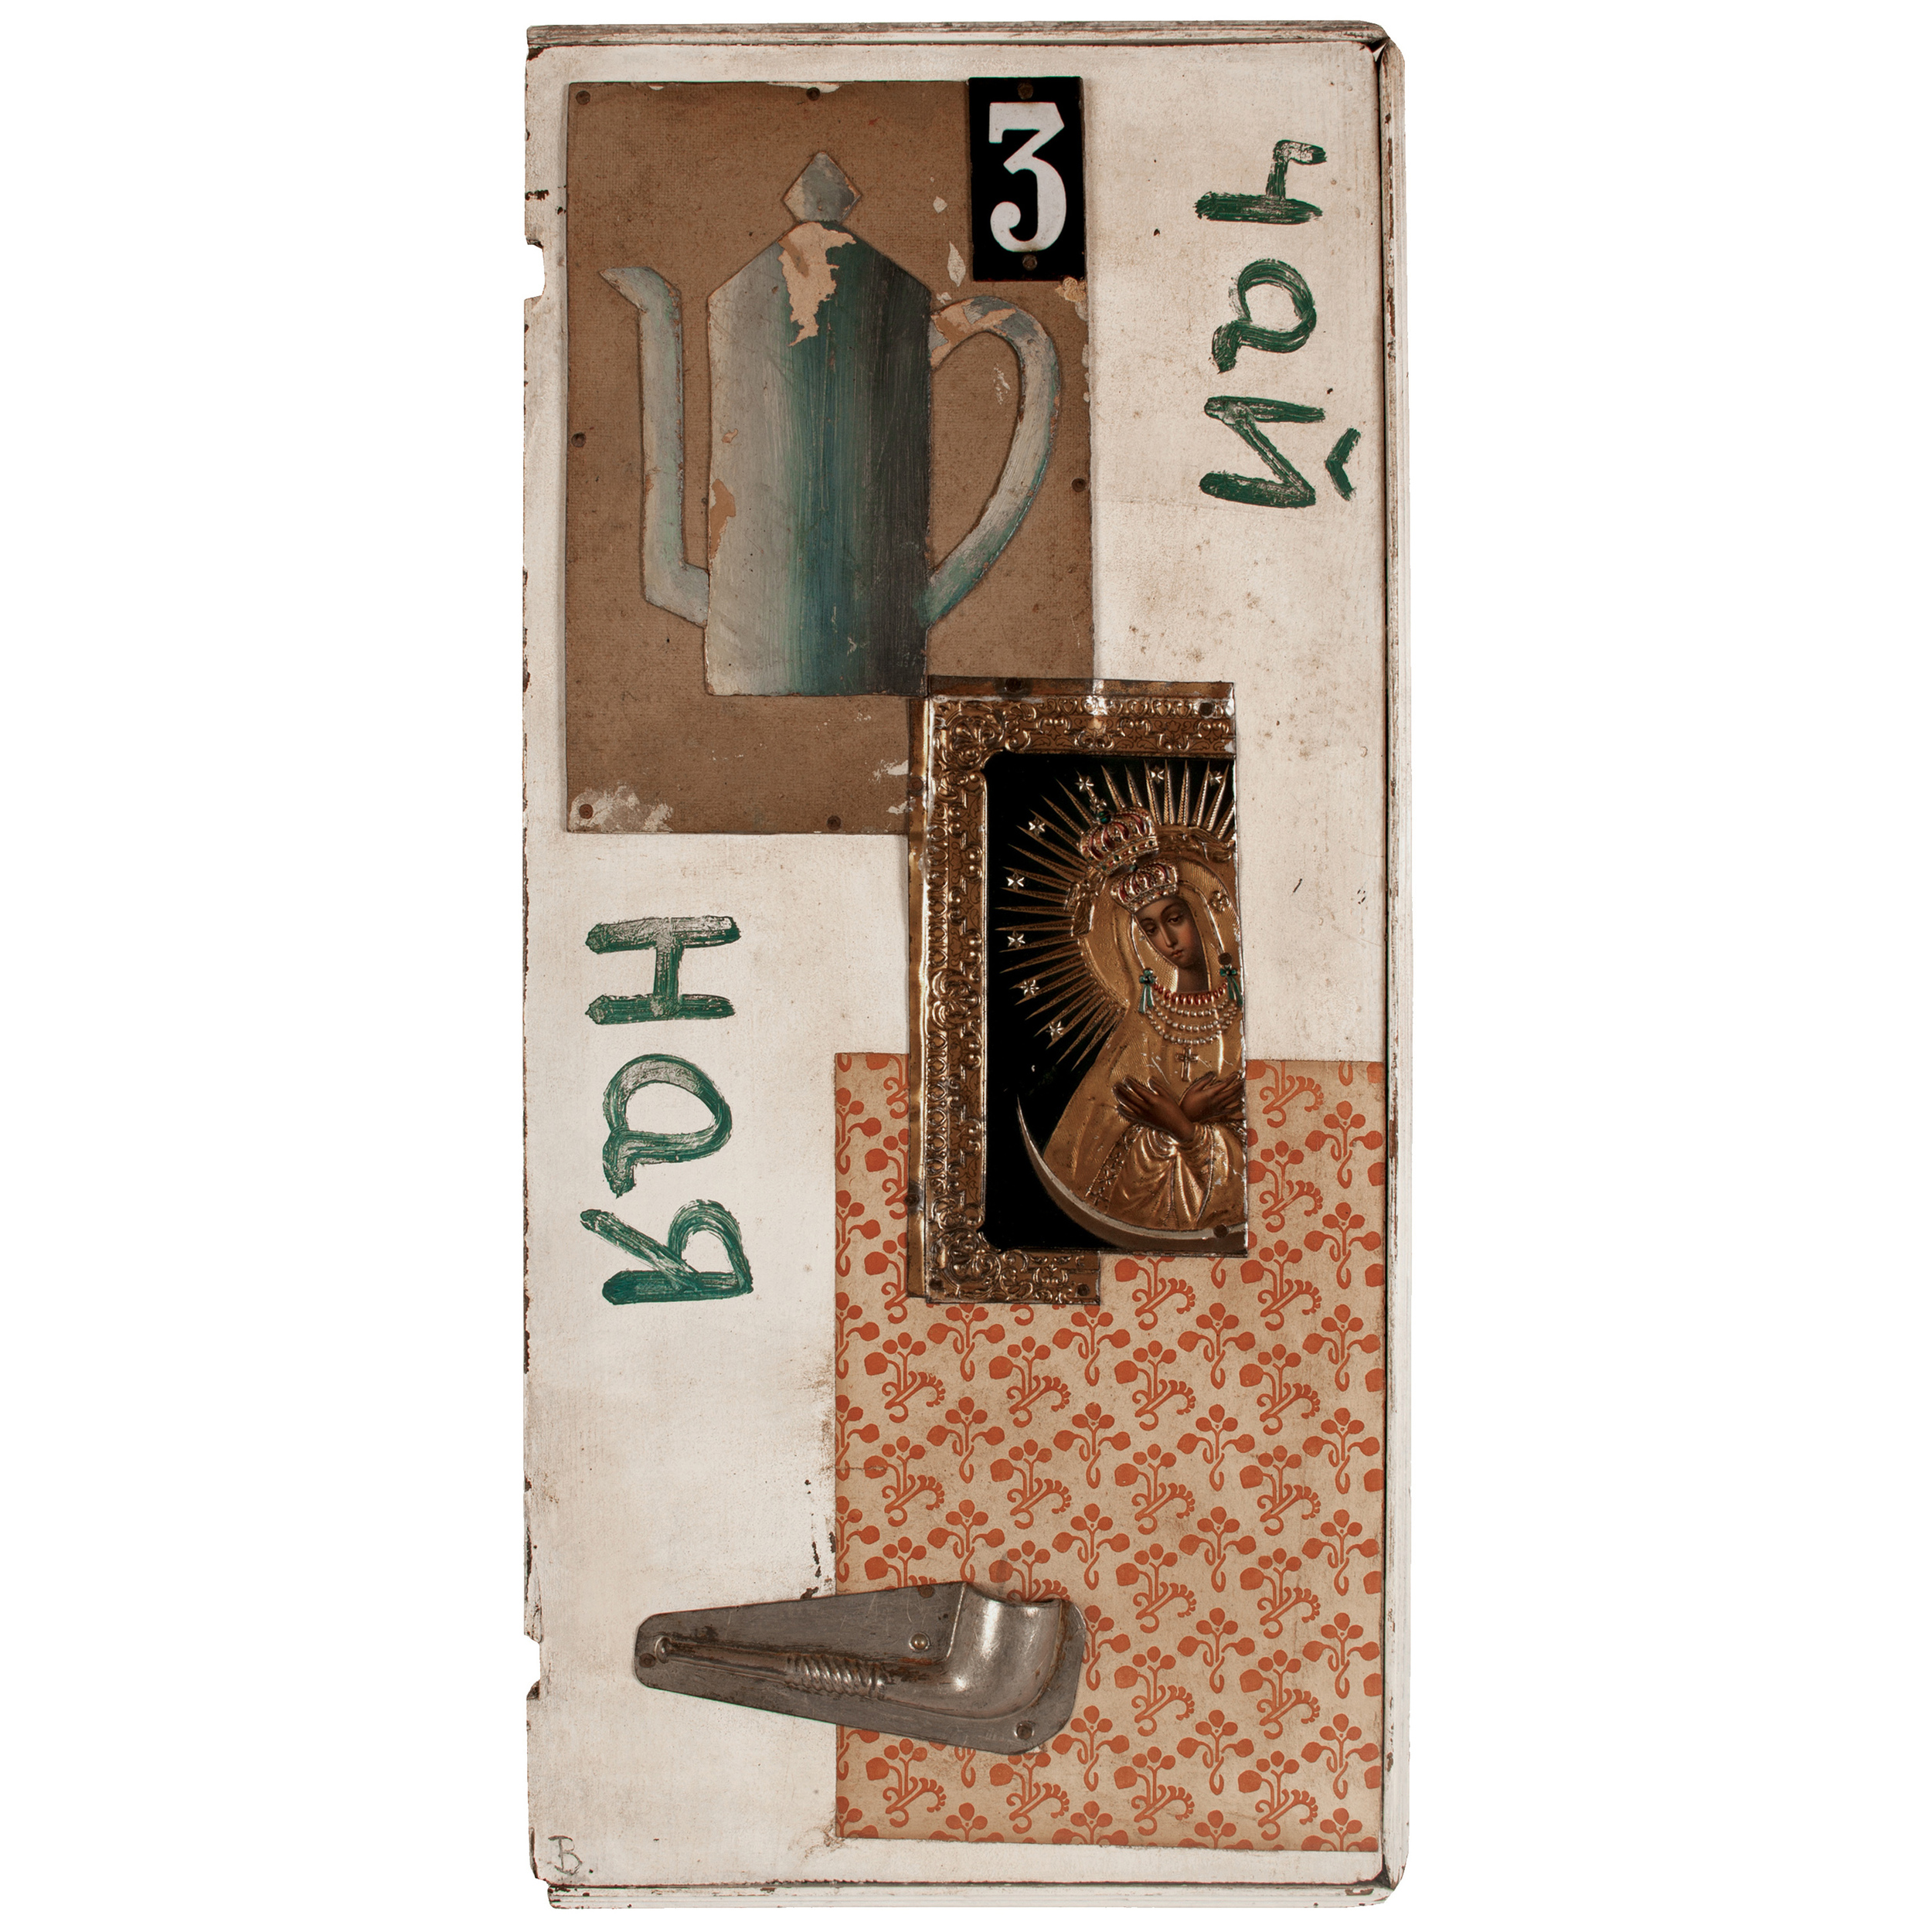  Unattributed. Unsigned.   Inscription on reverse written in Russian, translates to “TEA ROOM”.     Mixed media wooden construction. 52 x 34 cm. 